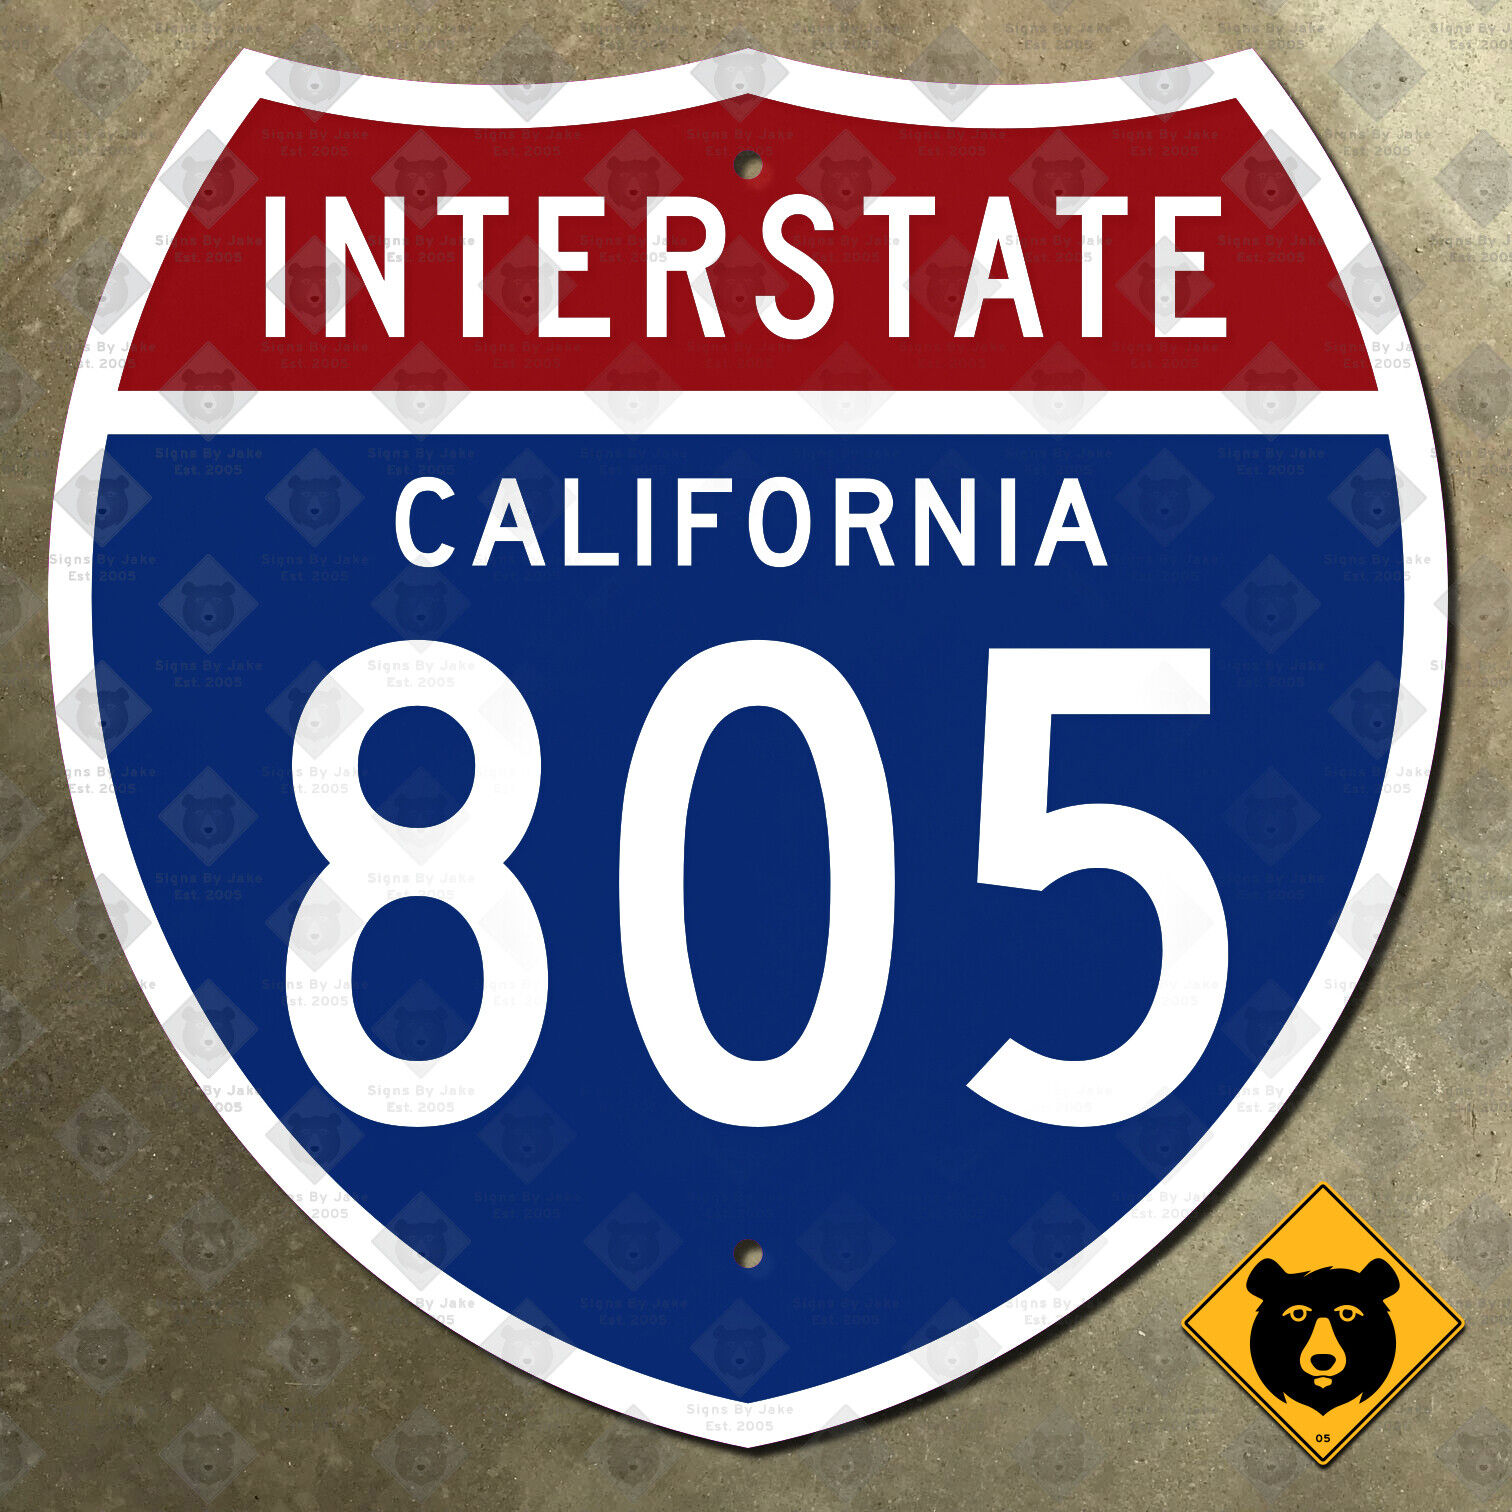 California Interstate 805 route highway road sign San Diego Chula Vista 12x12